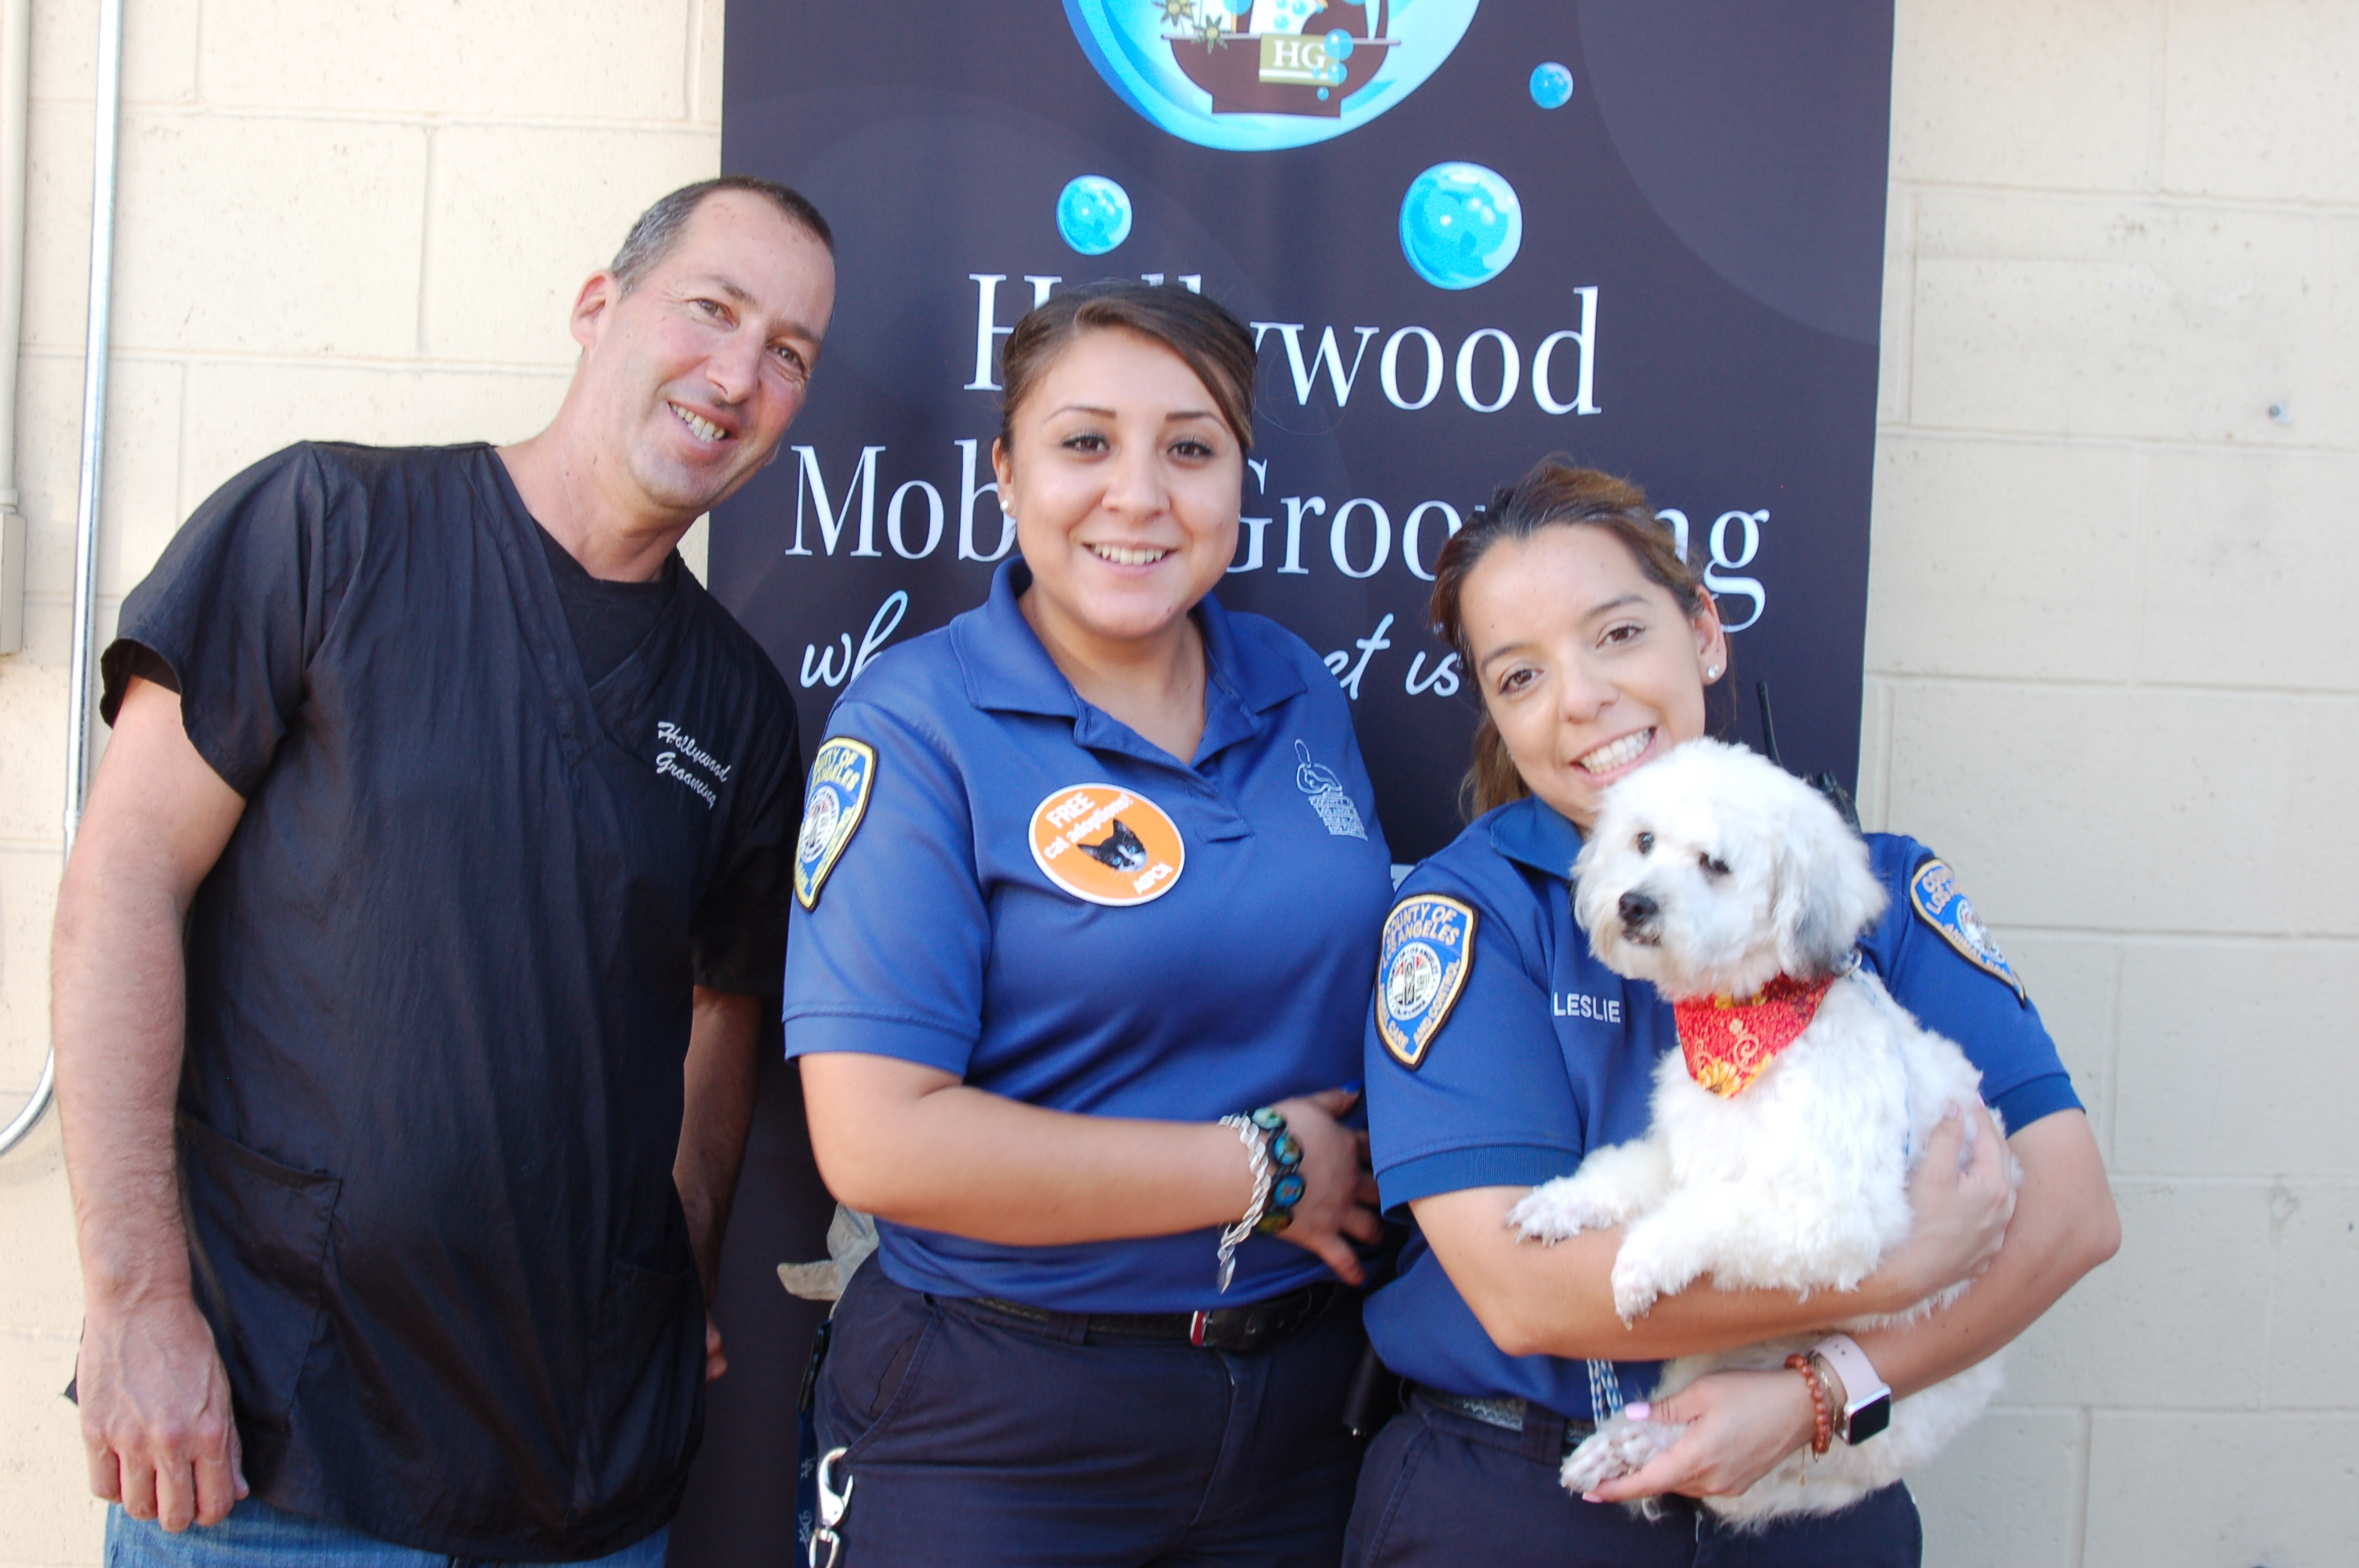 Chuck and team members hold a dog at a Community Event.